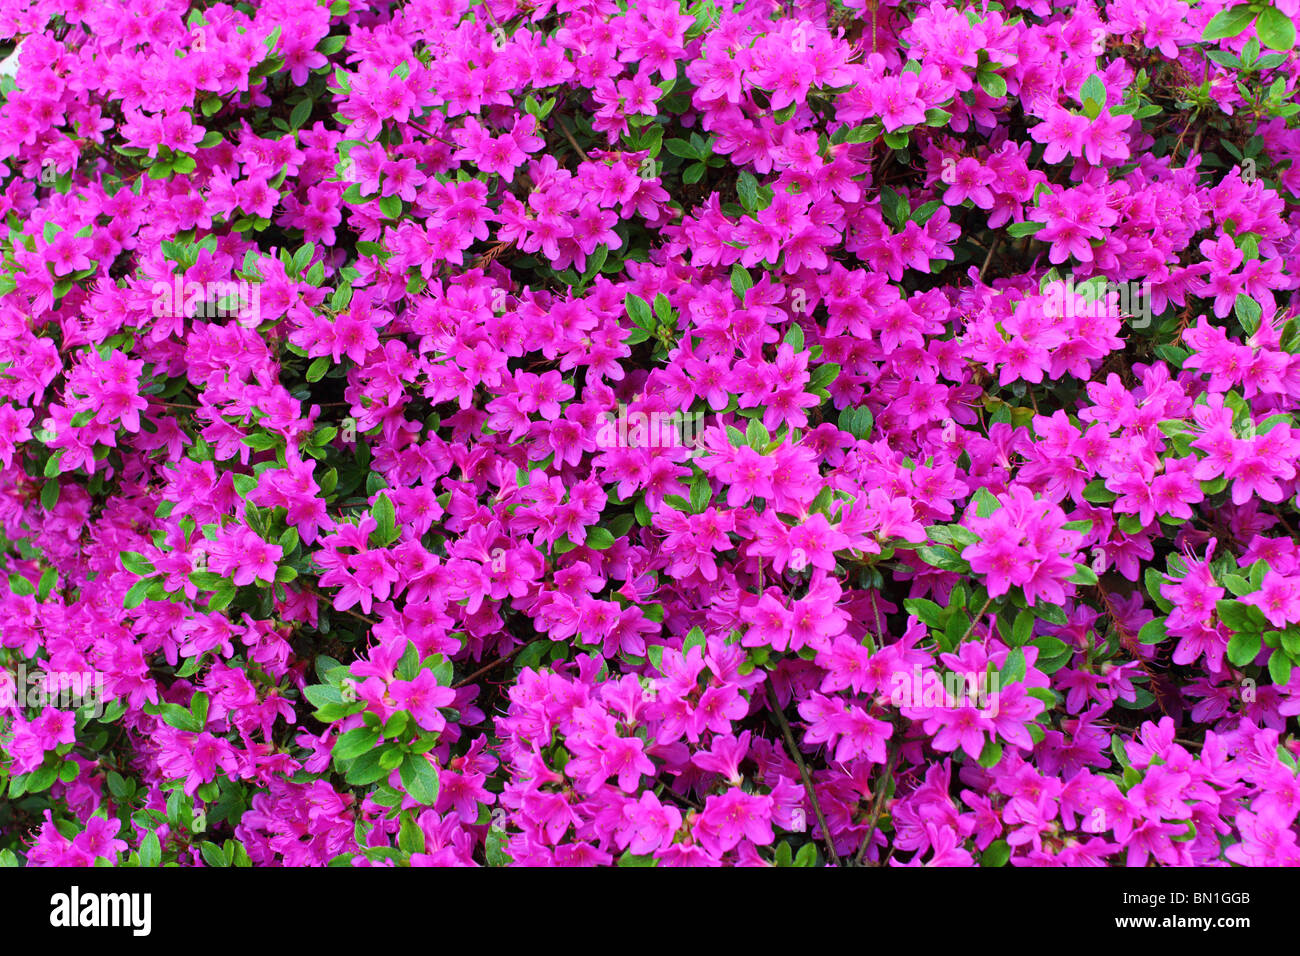 Rhododendron Purple Flowers close up Banque D'Images